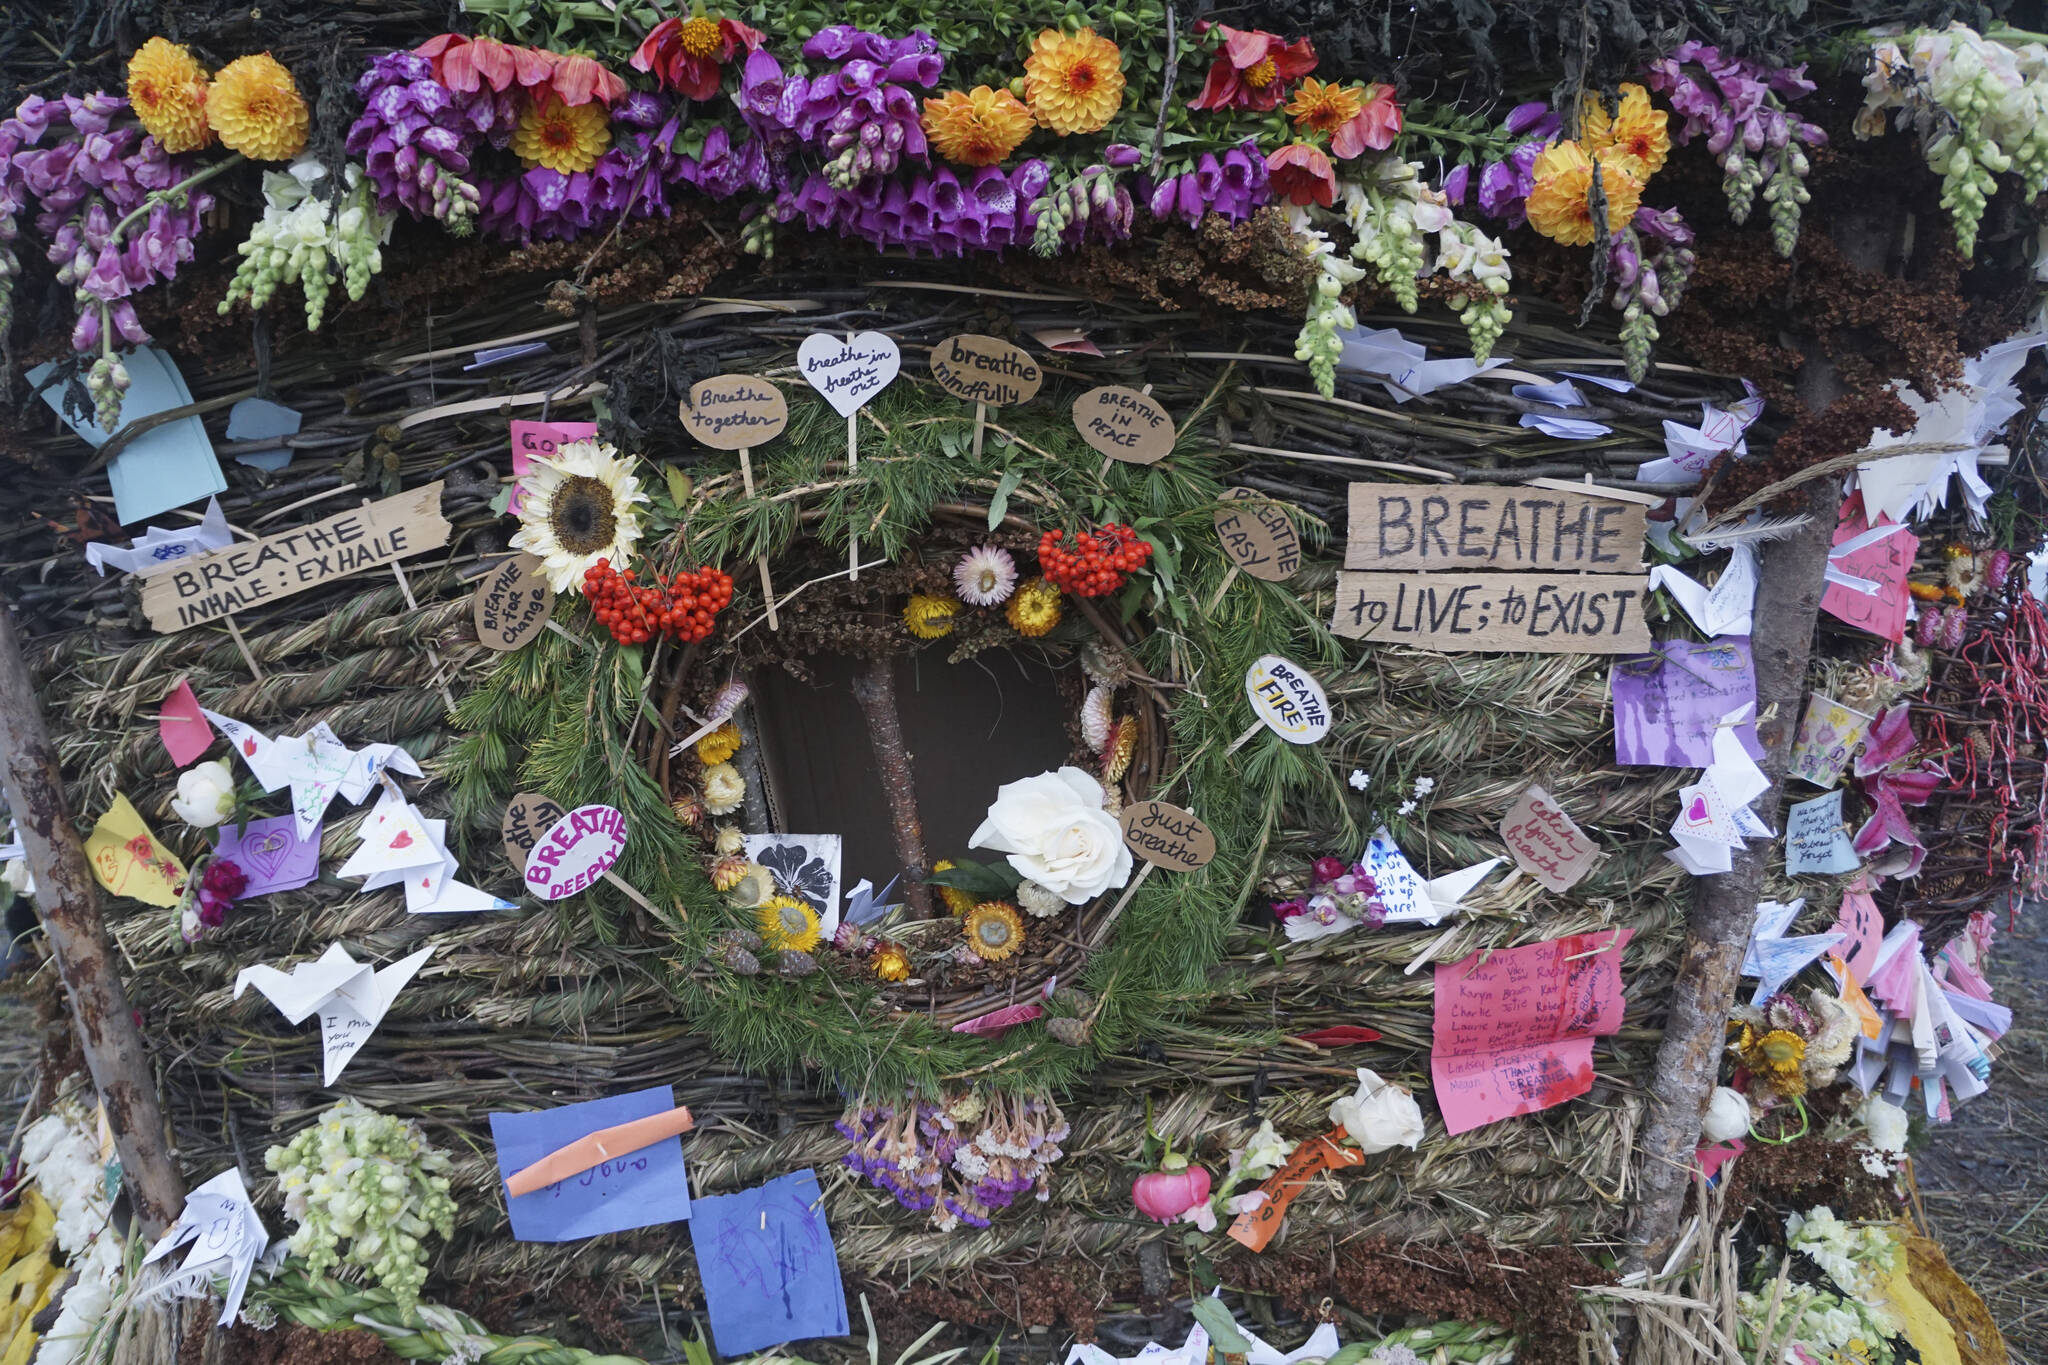 One of the portals in the 19th annual Burning Basket, “Breathe,” on Sunday, Sept. 11, 2022, at Mariner Park on the Homer Spit in Homer, Alaska. People placed notes expressing various sentiments inside the basket. (Photo by Michael Armstrong/Homer News)